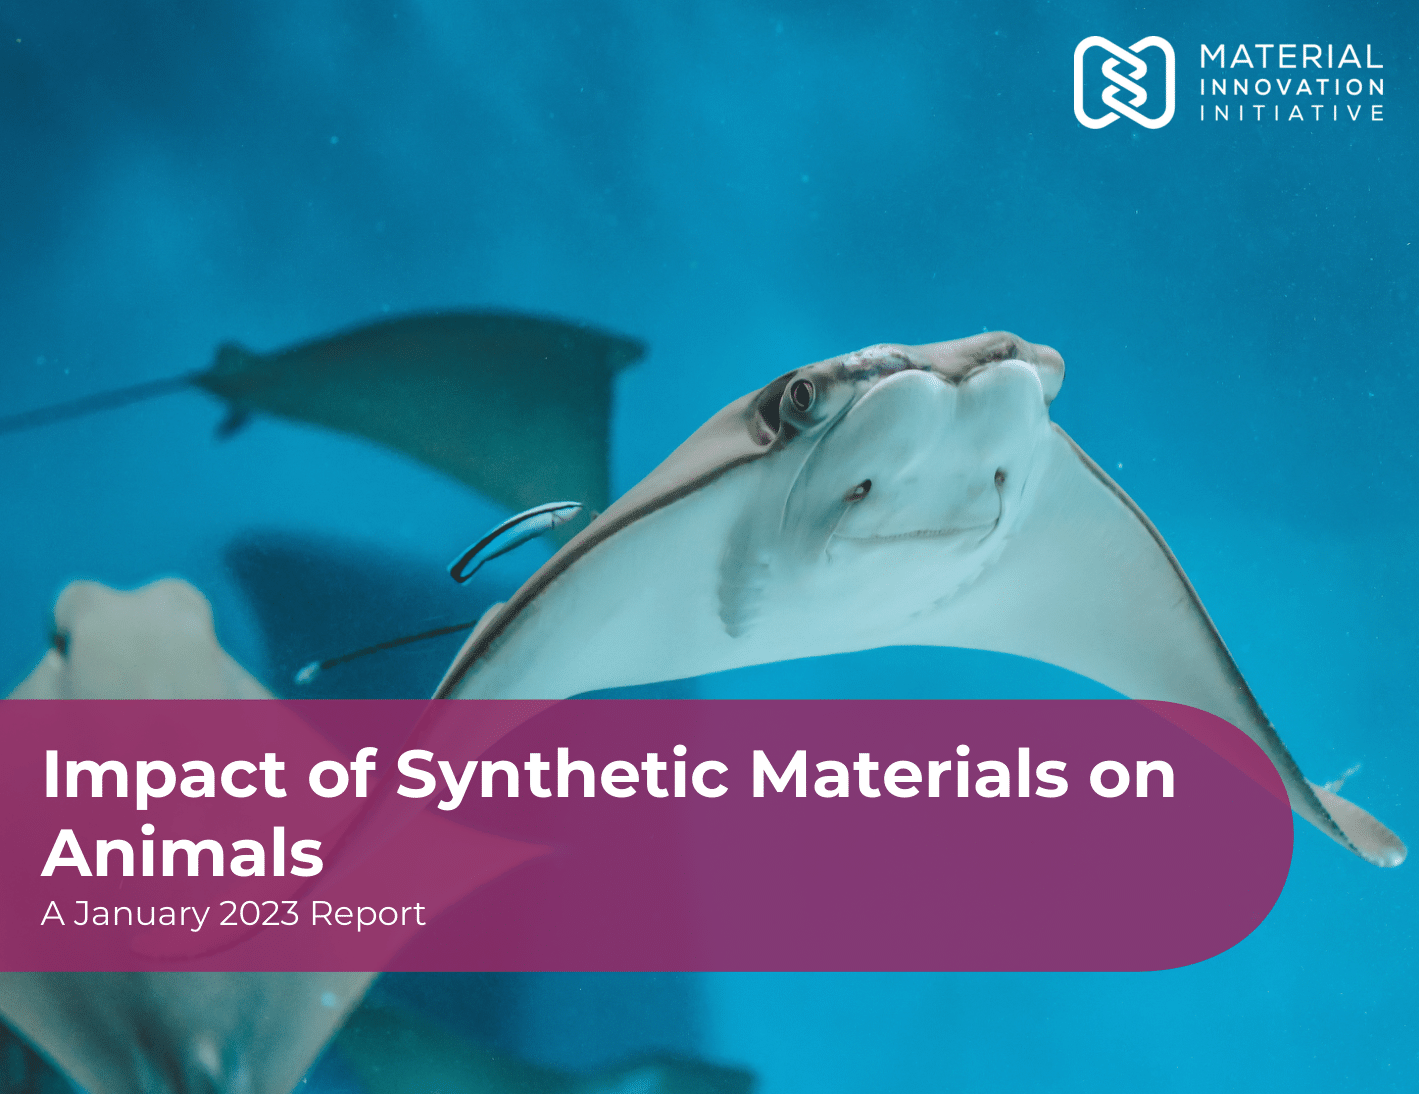 Impact of Synthetic Materials on Animals Report Hero Photo (Rays)